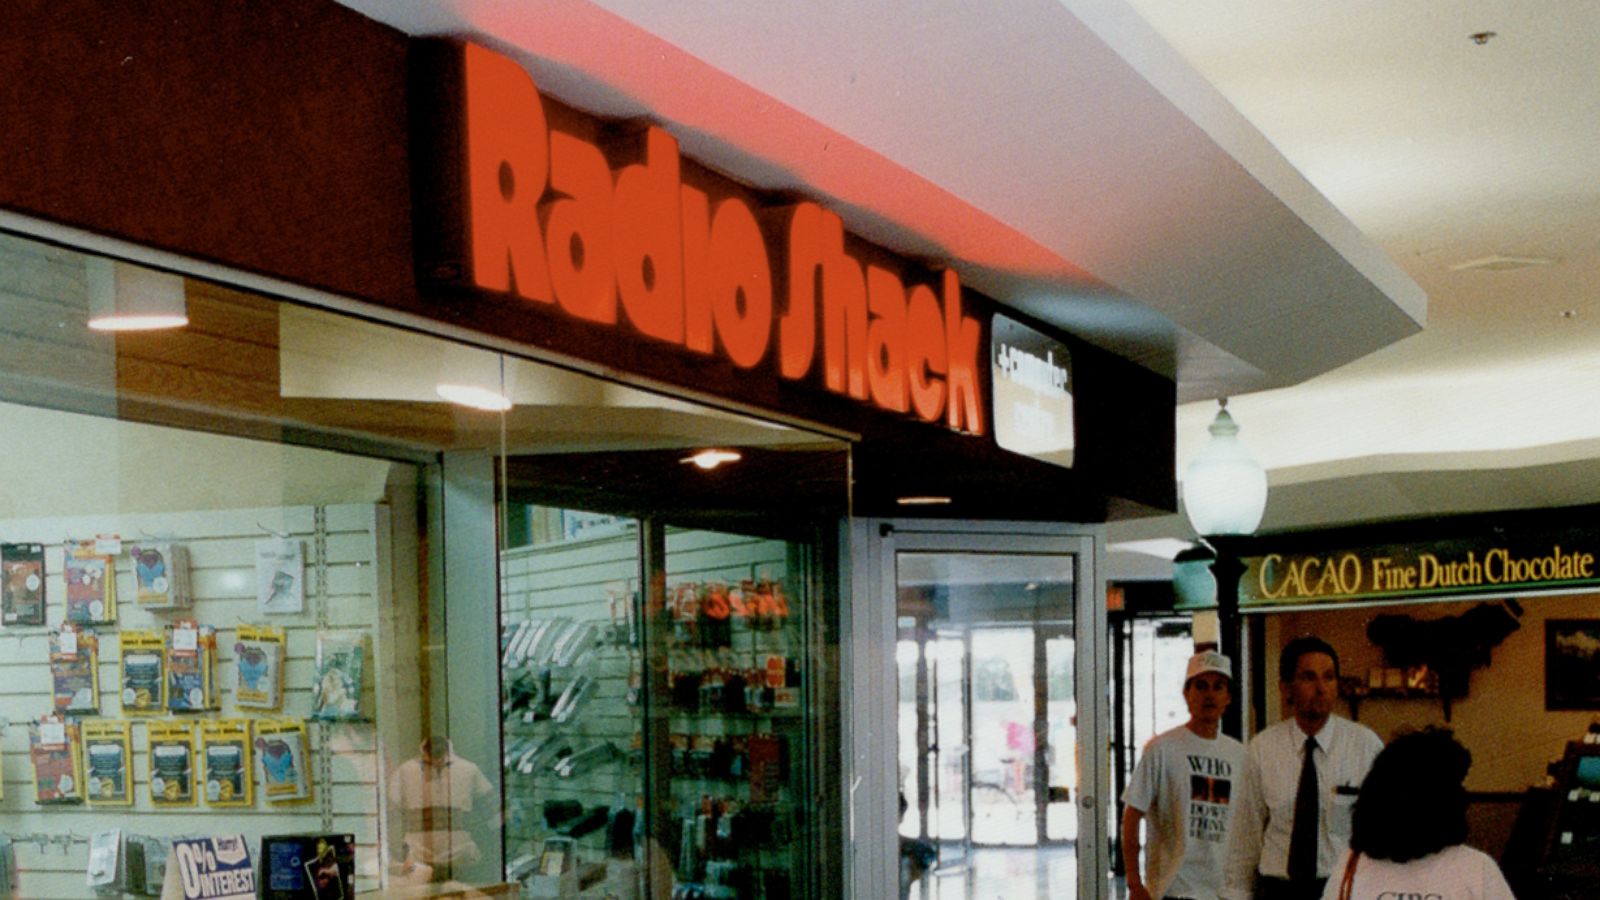 Radioshack Nostalgia A Look Back At Its Glory Days From The 1980s